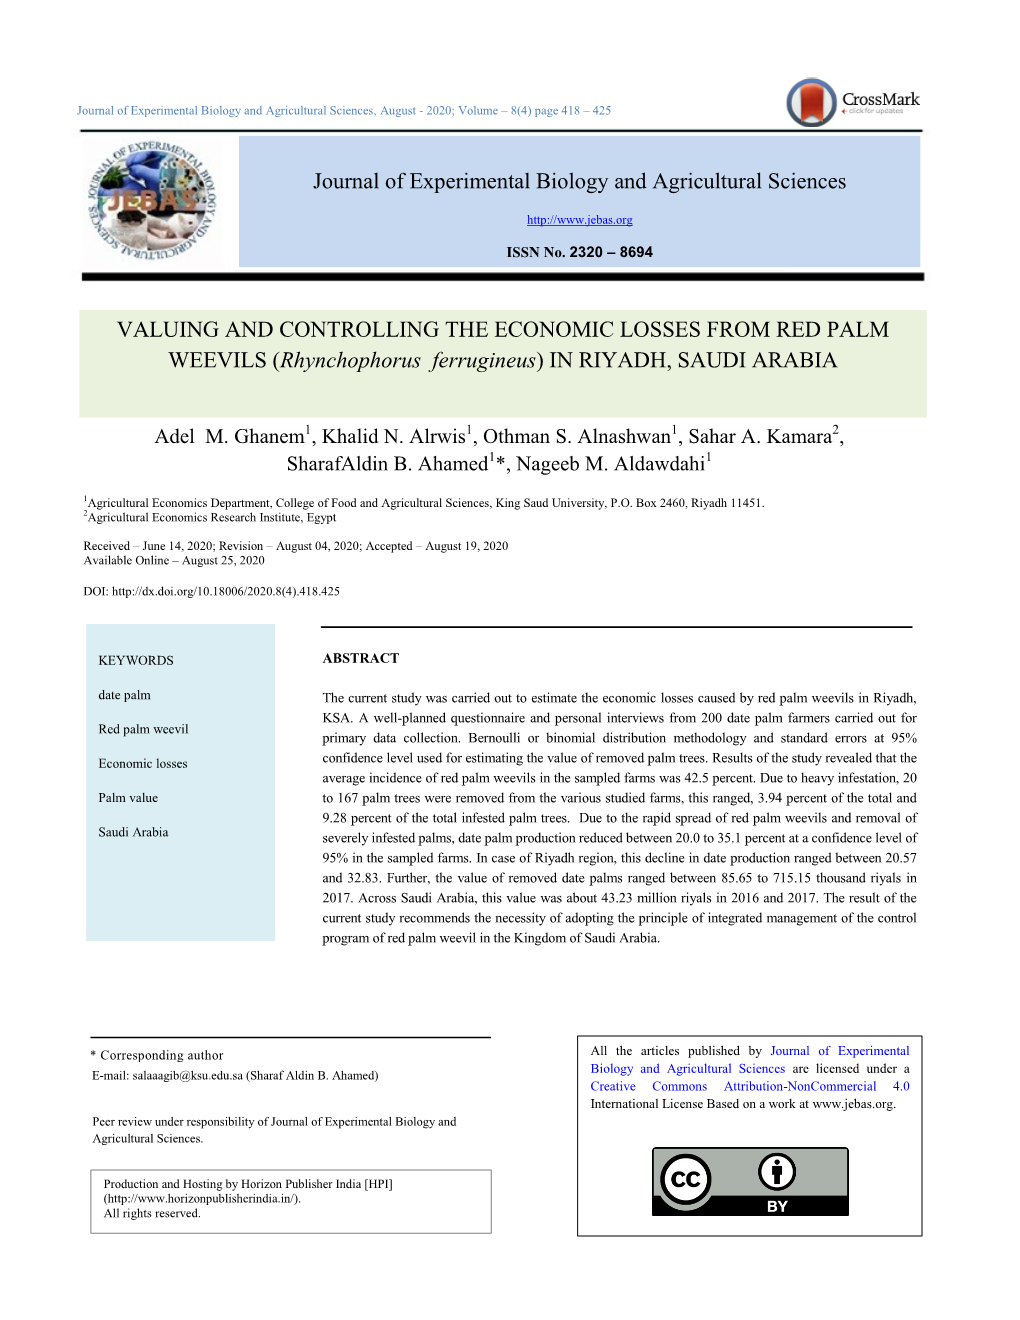 Journal of Experimental Biology and Agricultural Sciences VALUING and CONTROLLING